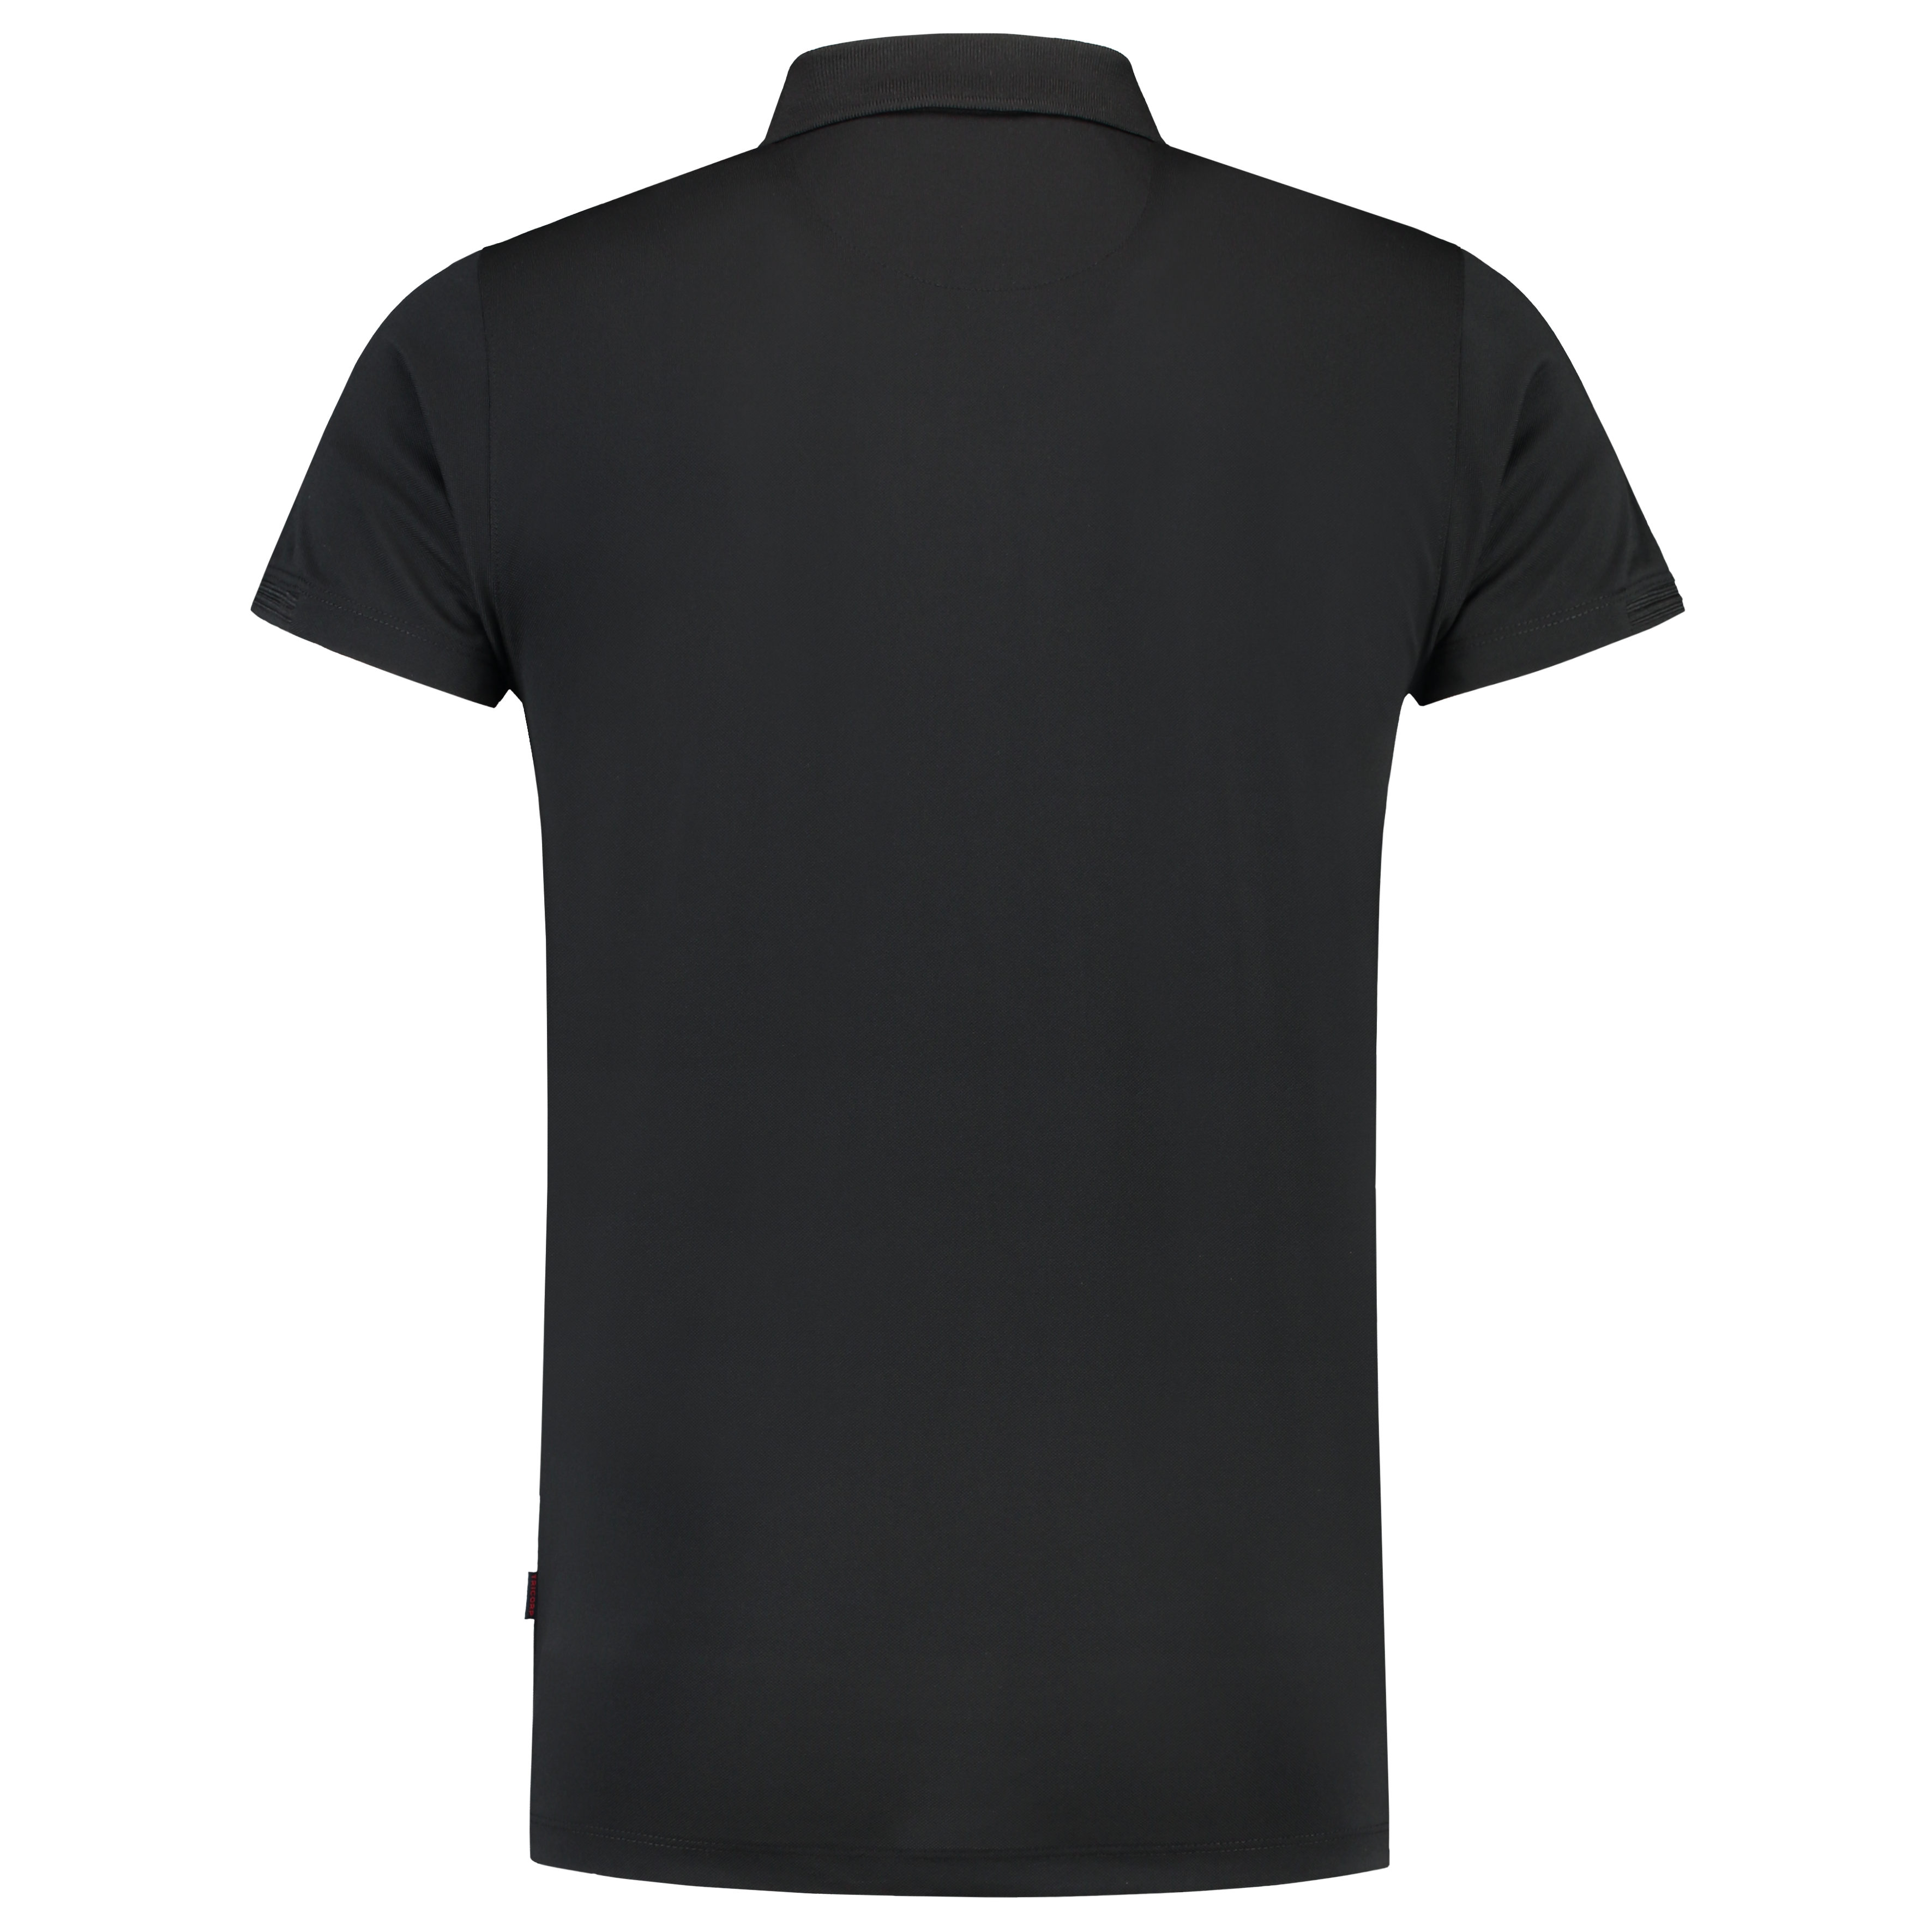 Cooldry Bamboo Fitted polo shirt